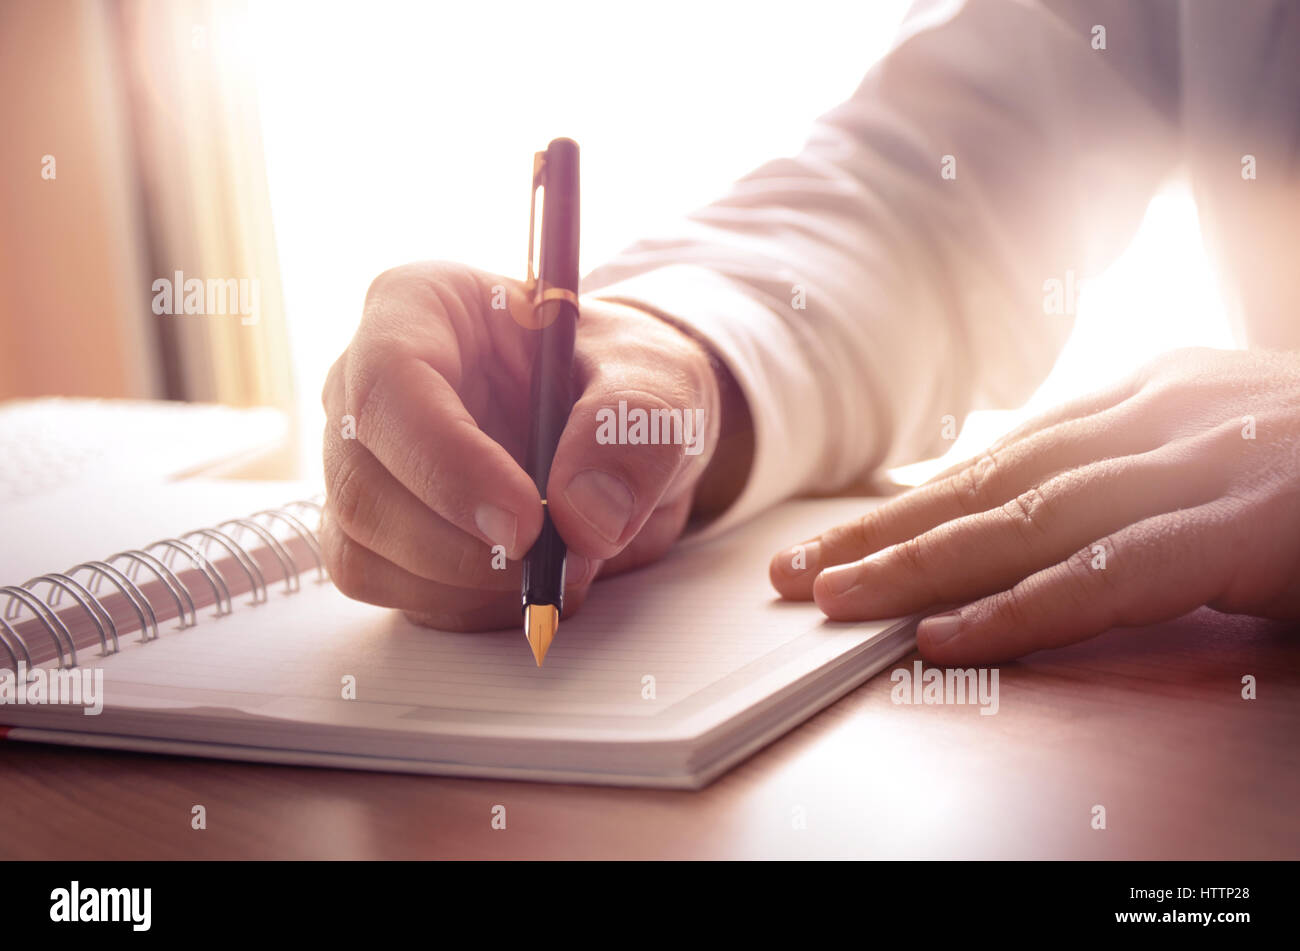 Businessman writing on a notebook. Image can be used for several purposes like: background, website banner, promotional materials, poster, presentatio Stock Photo